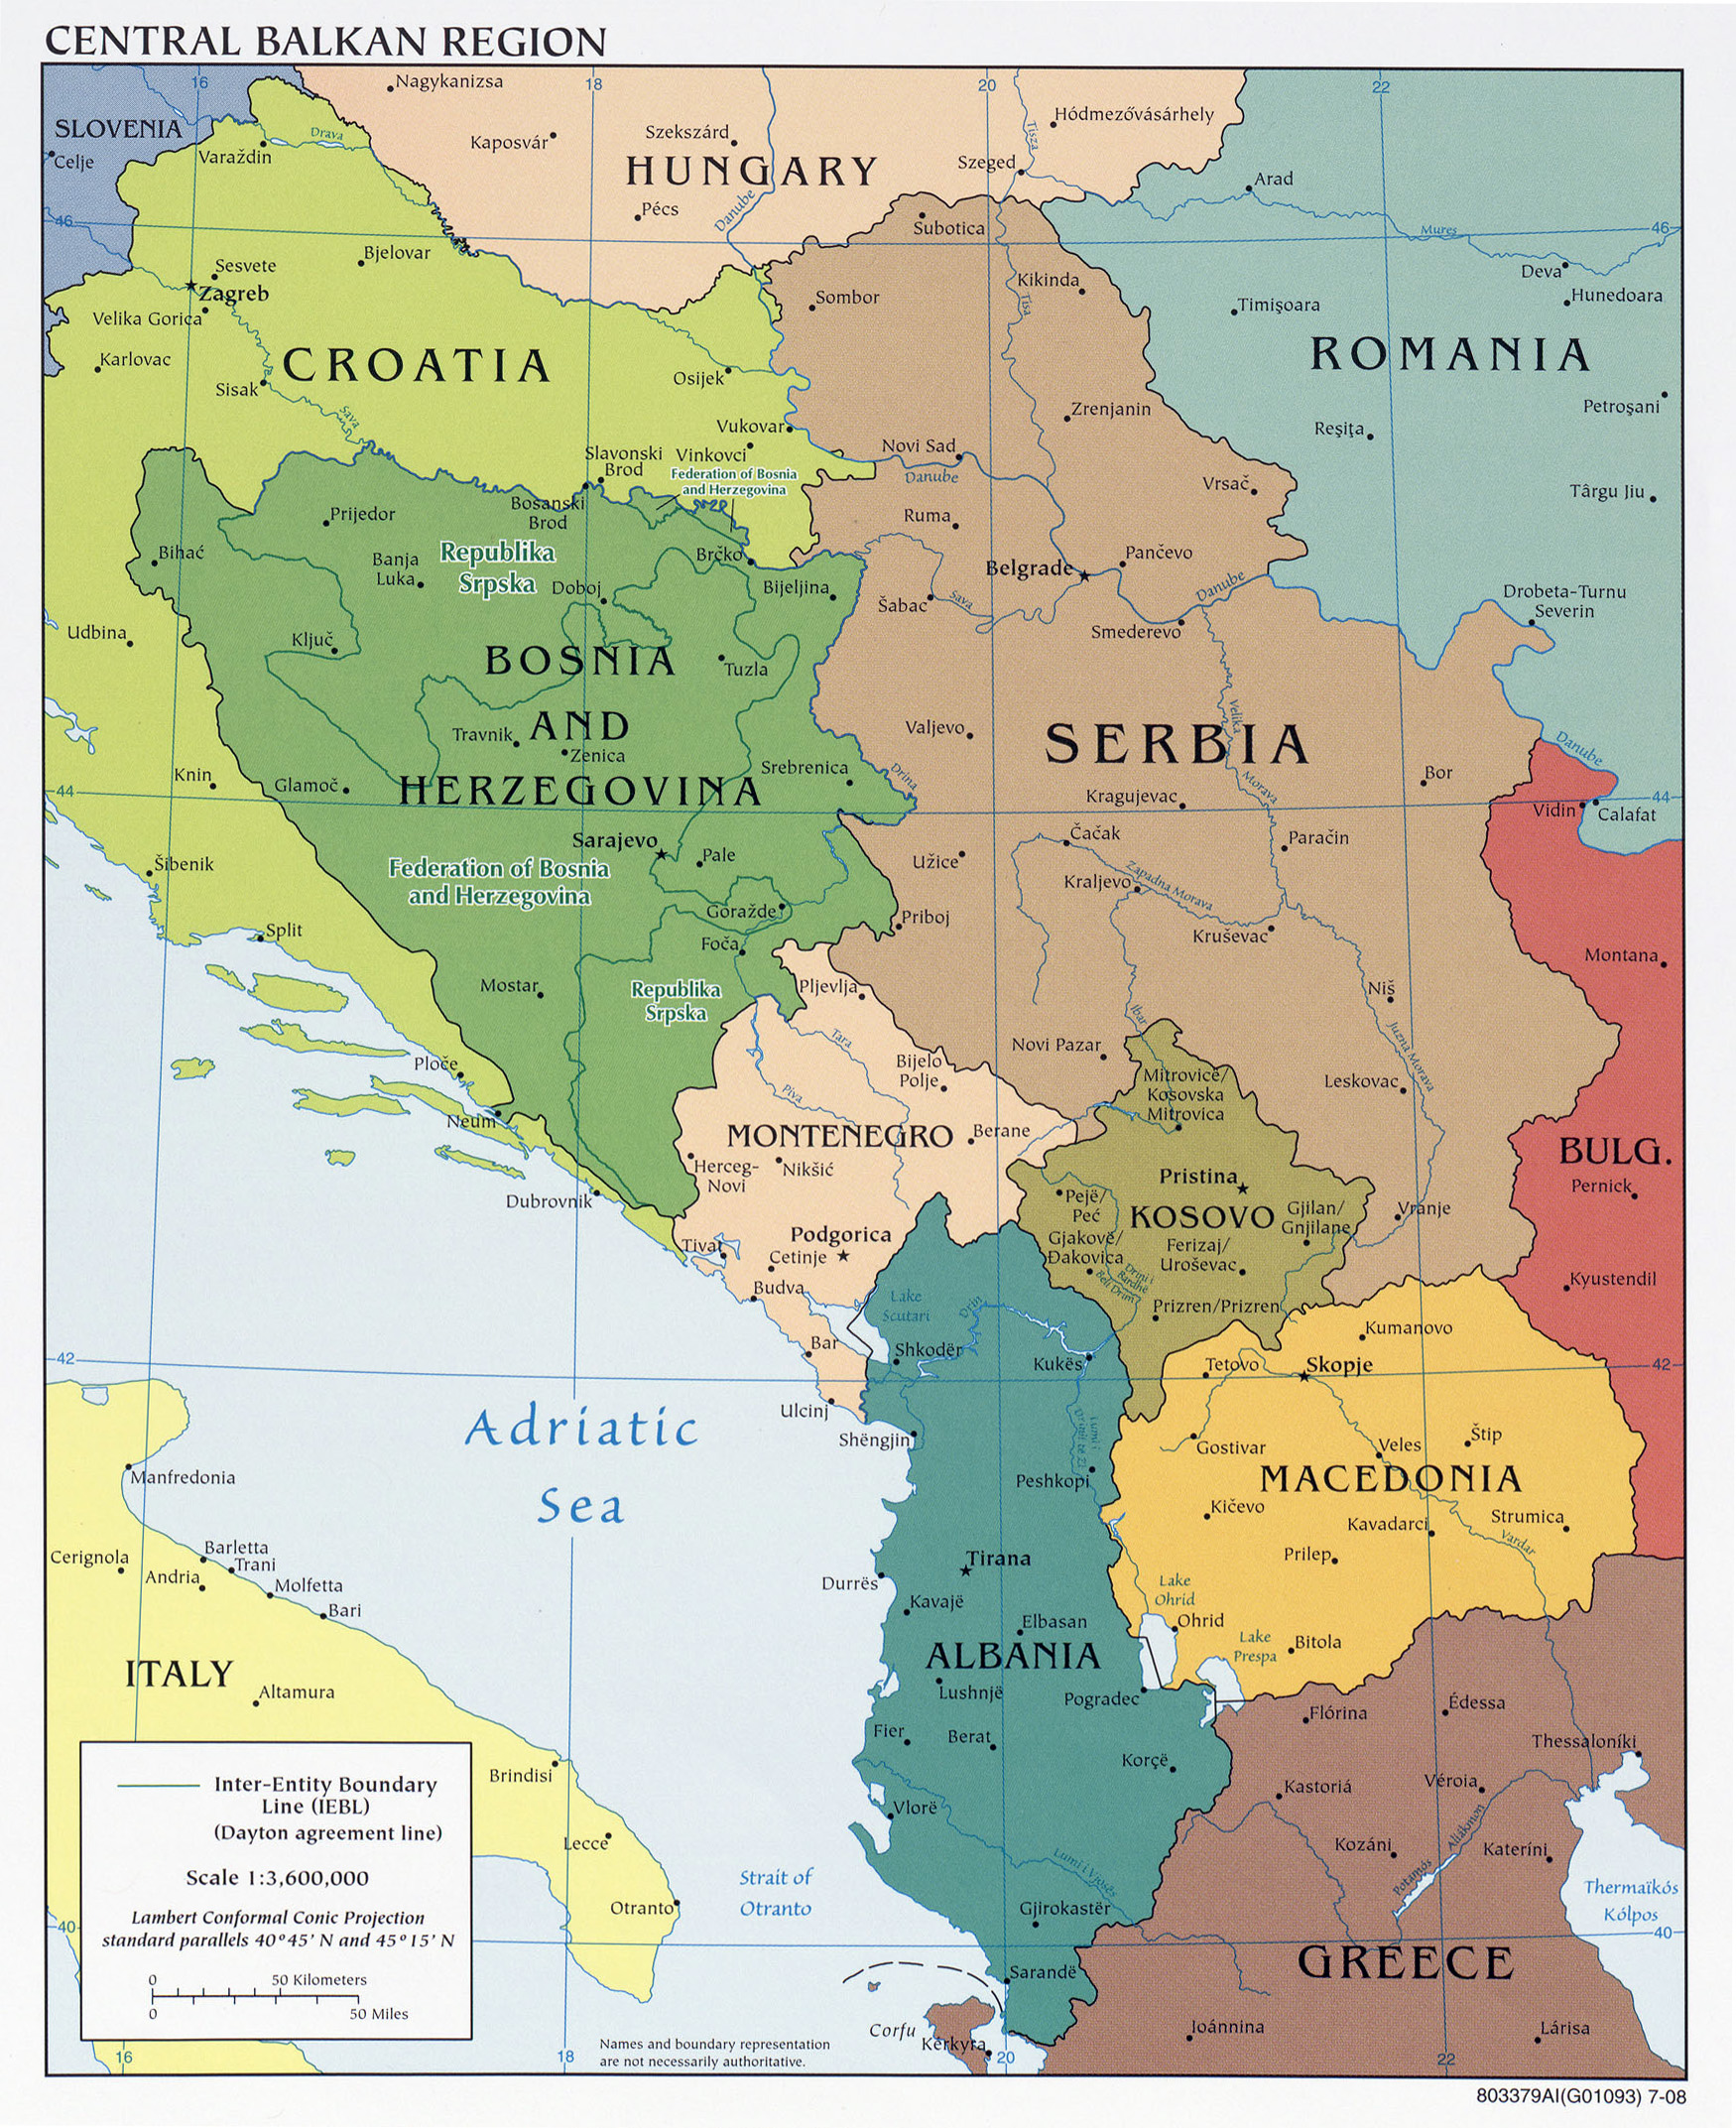 Large Detailed Political Map Of Central Balkan Region With Major Cities 2008 